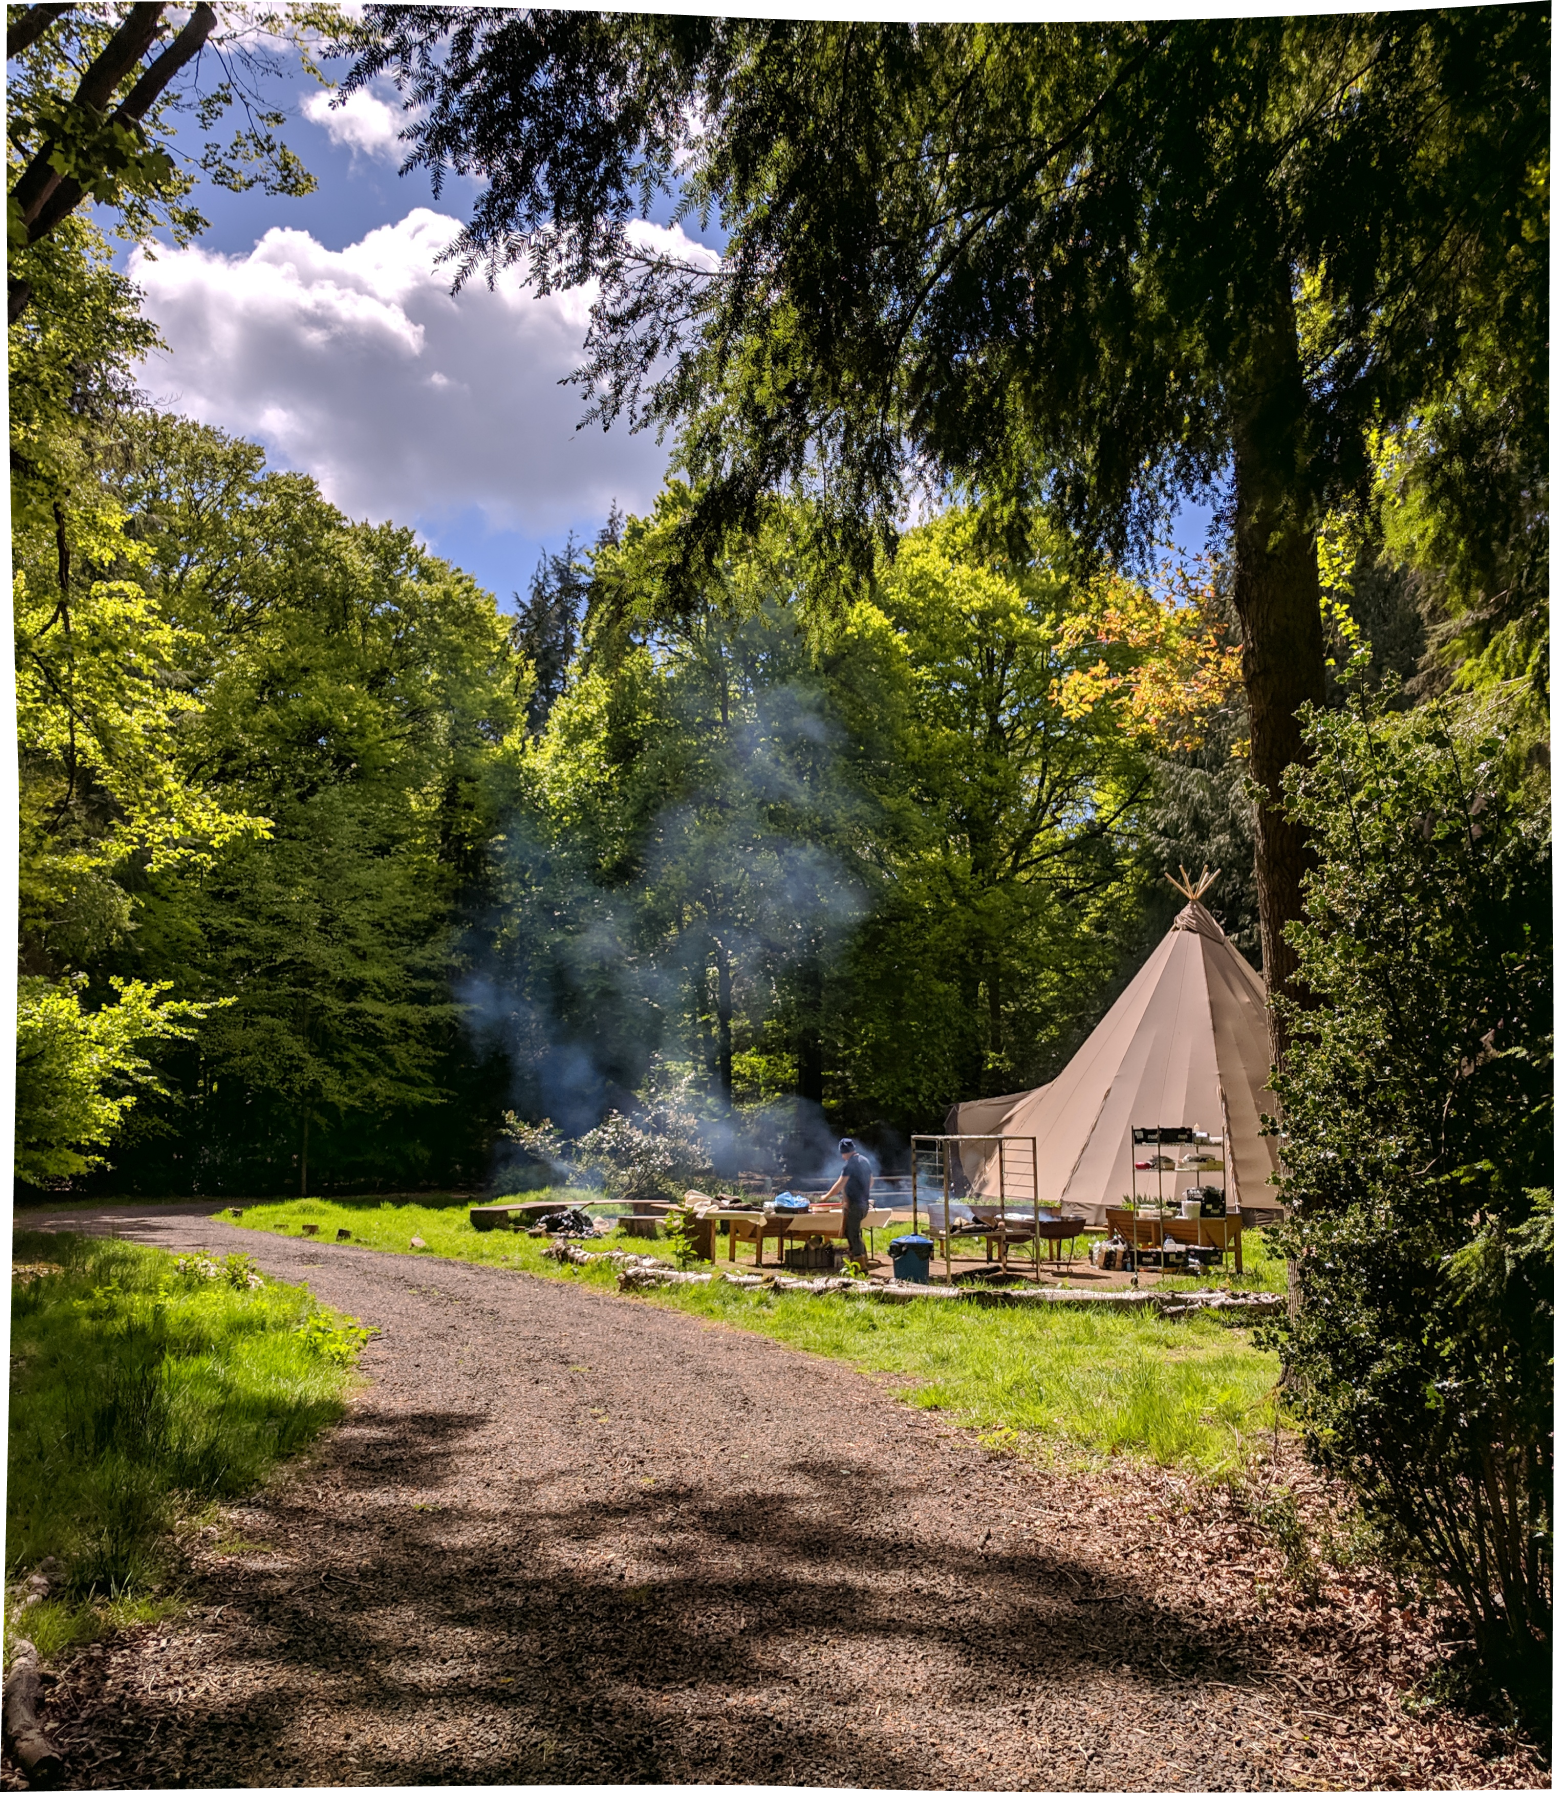 One of our tipis is spotted in the back of an open-fire cooking, in a beautiful cloudy day at Nomadic's woodland